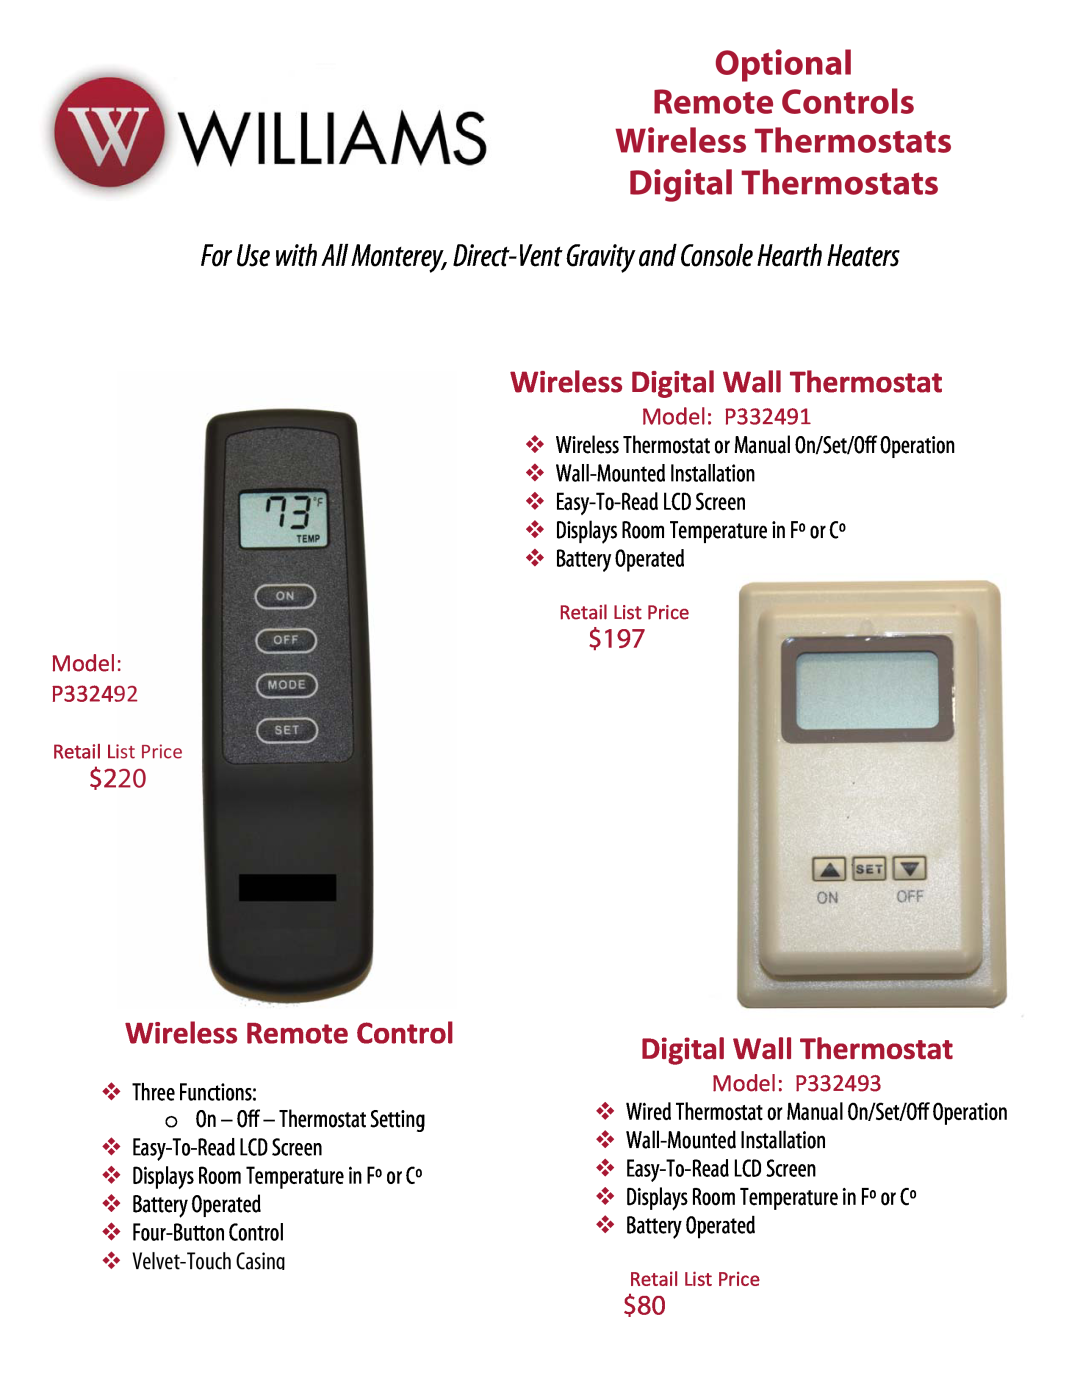 Williams 3509622.6 Optional Remote Controls Wireless Thermostats, Digital Thermostats, Wireless Digital Wall Thermostat 